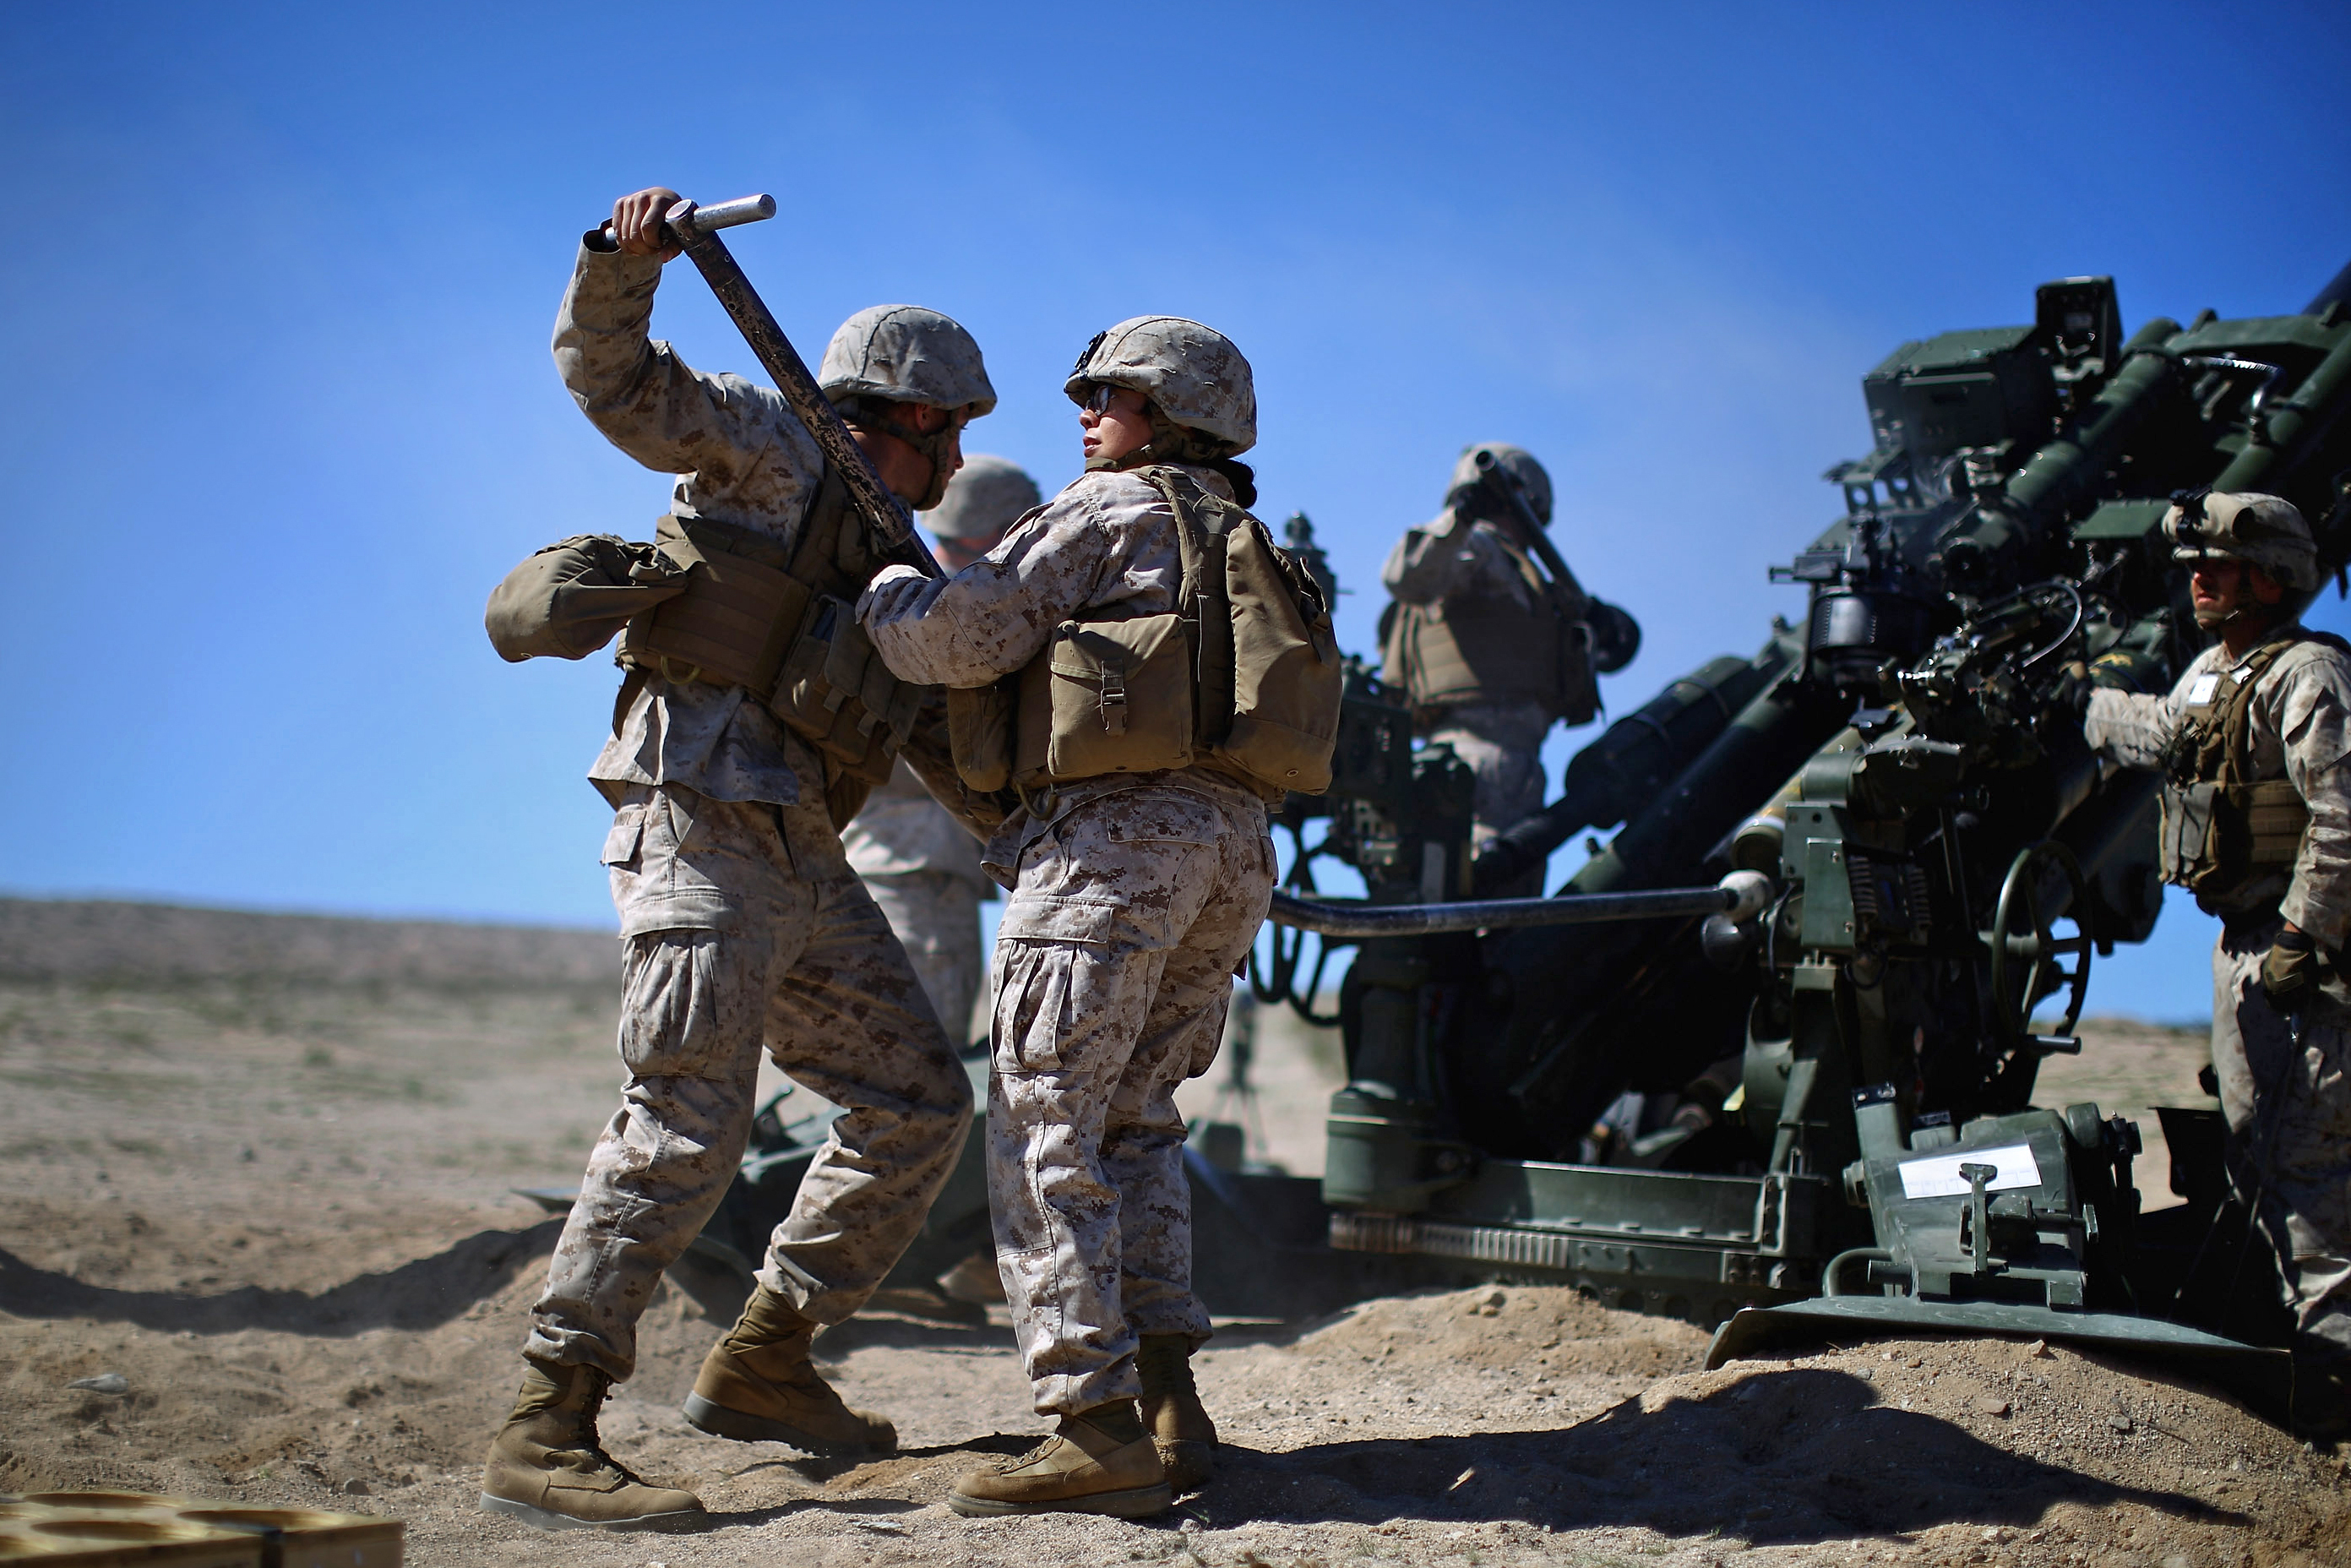 Defense Secretary Ash Carter is expected to announce that women can now serve in front-line combat posts. Here, Carolina Ortiz moves away from a 155-mm artillery piece after loading it during a live-fire exercise at the Marine base in Twentynine Palms, Calif., earlier this year, during a months-long study of how women might perform in ground combat jobs. David Gilkey/NPR